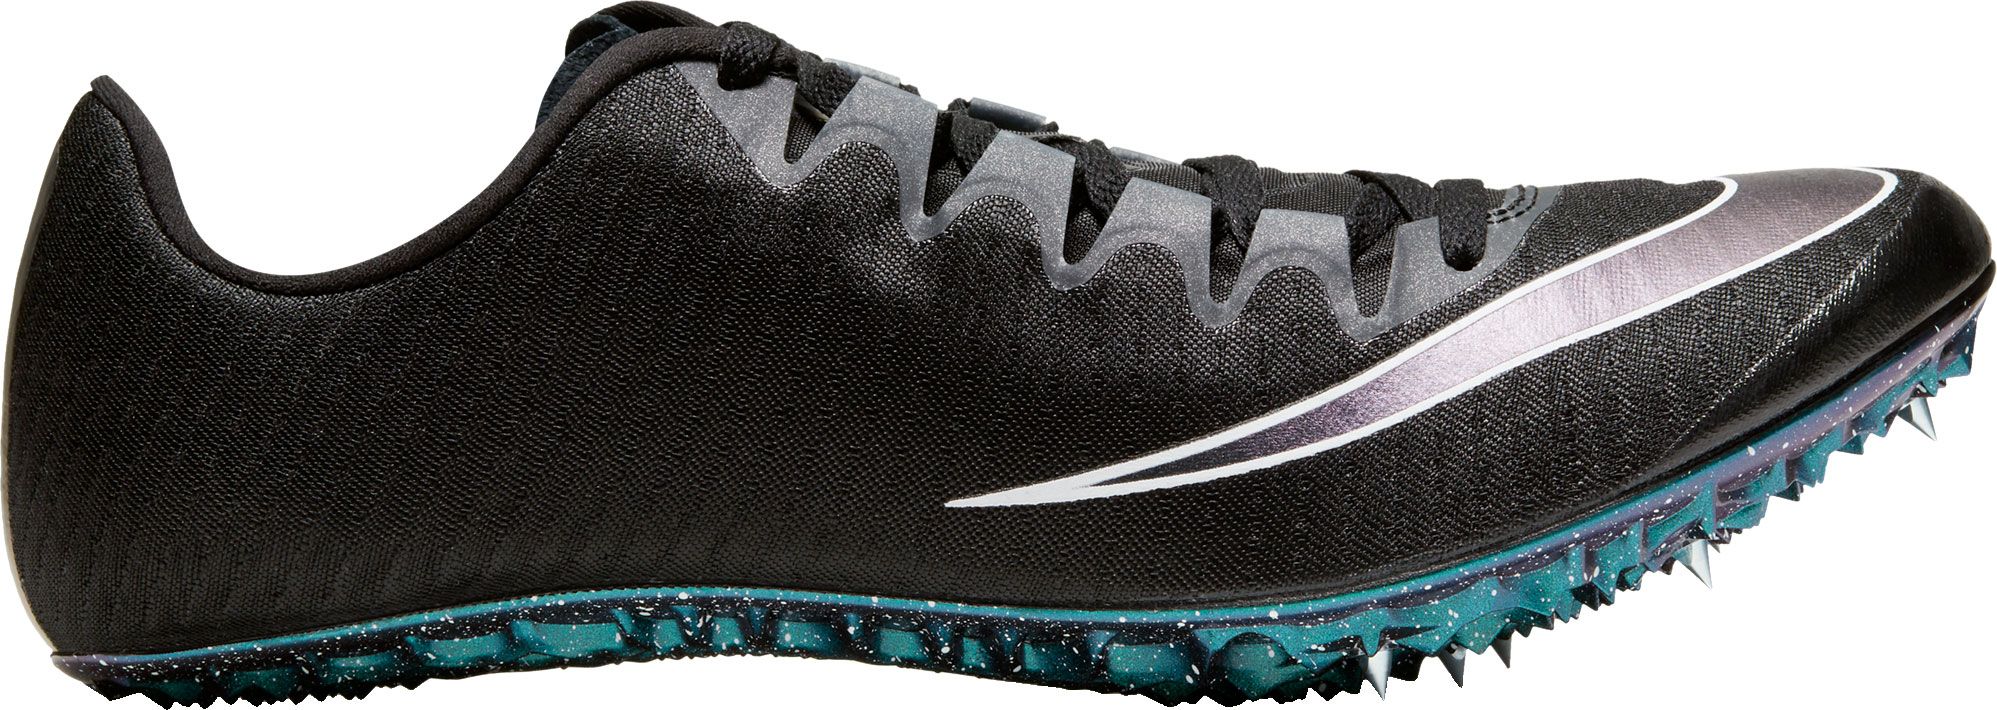 nike zoom superfly elite track and field shoes